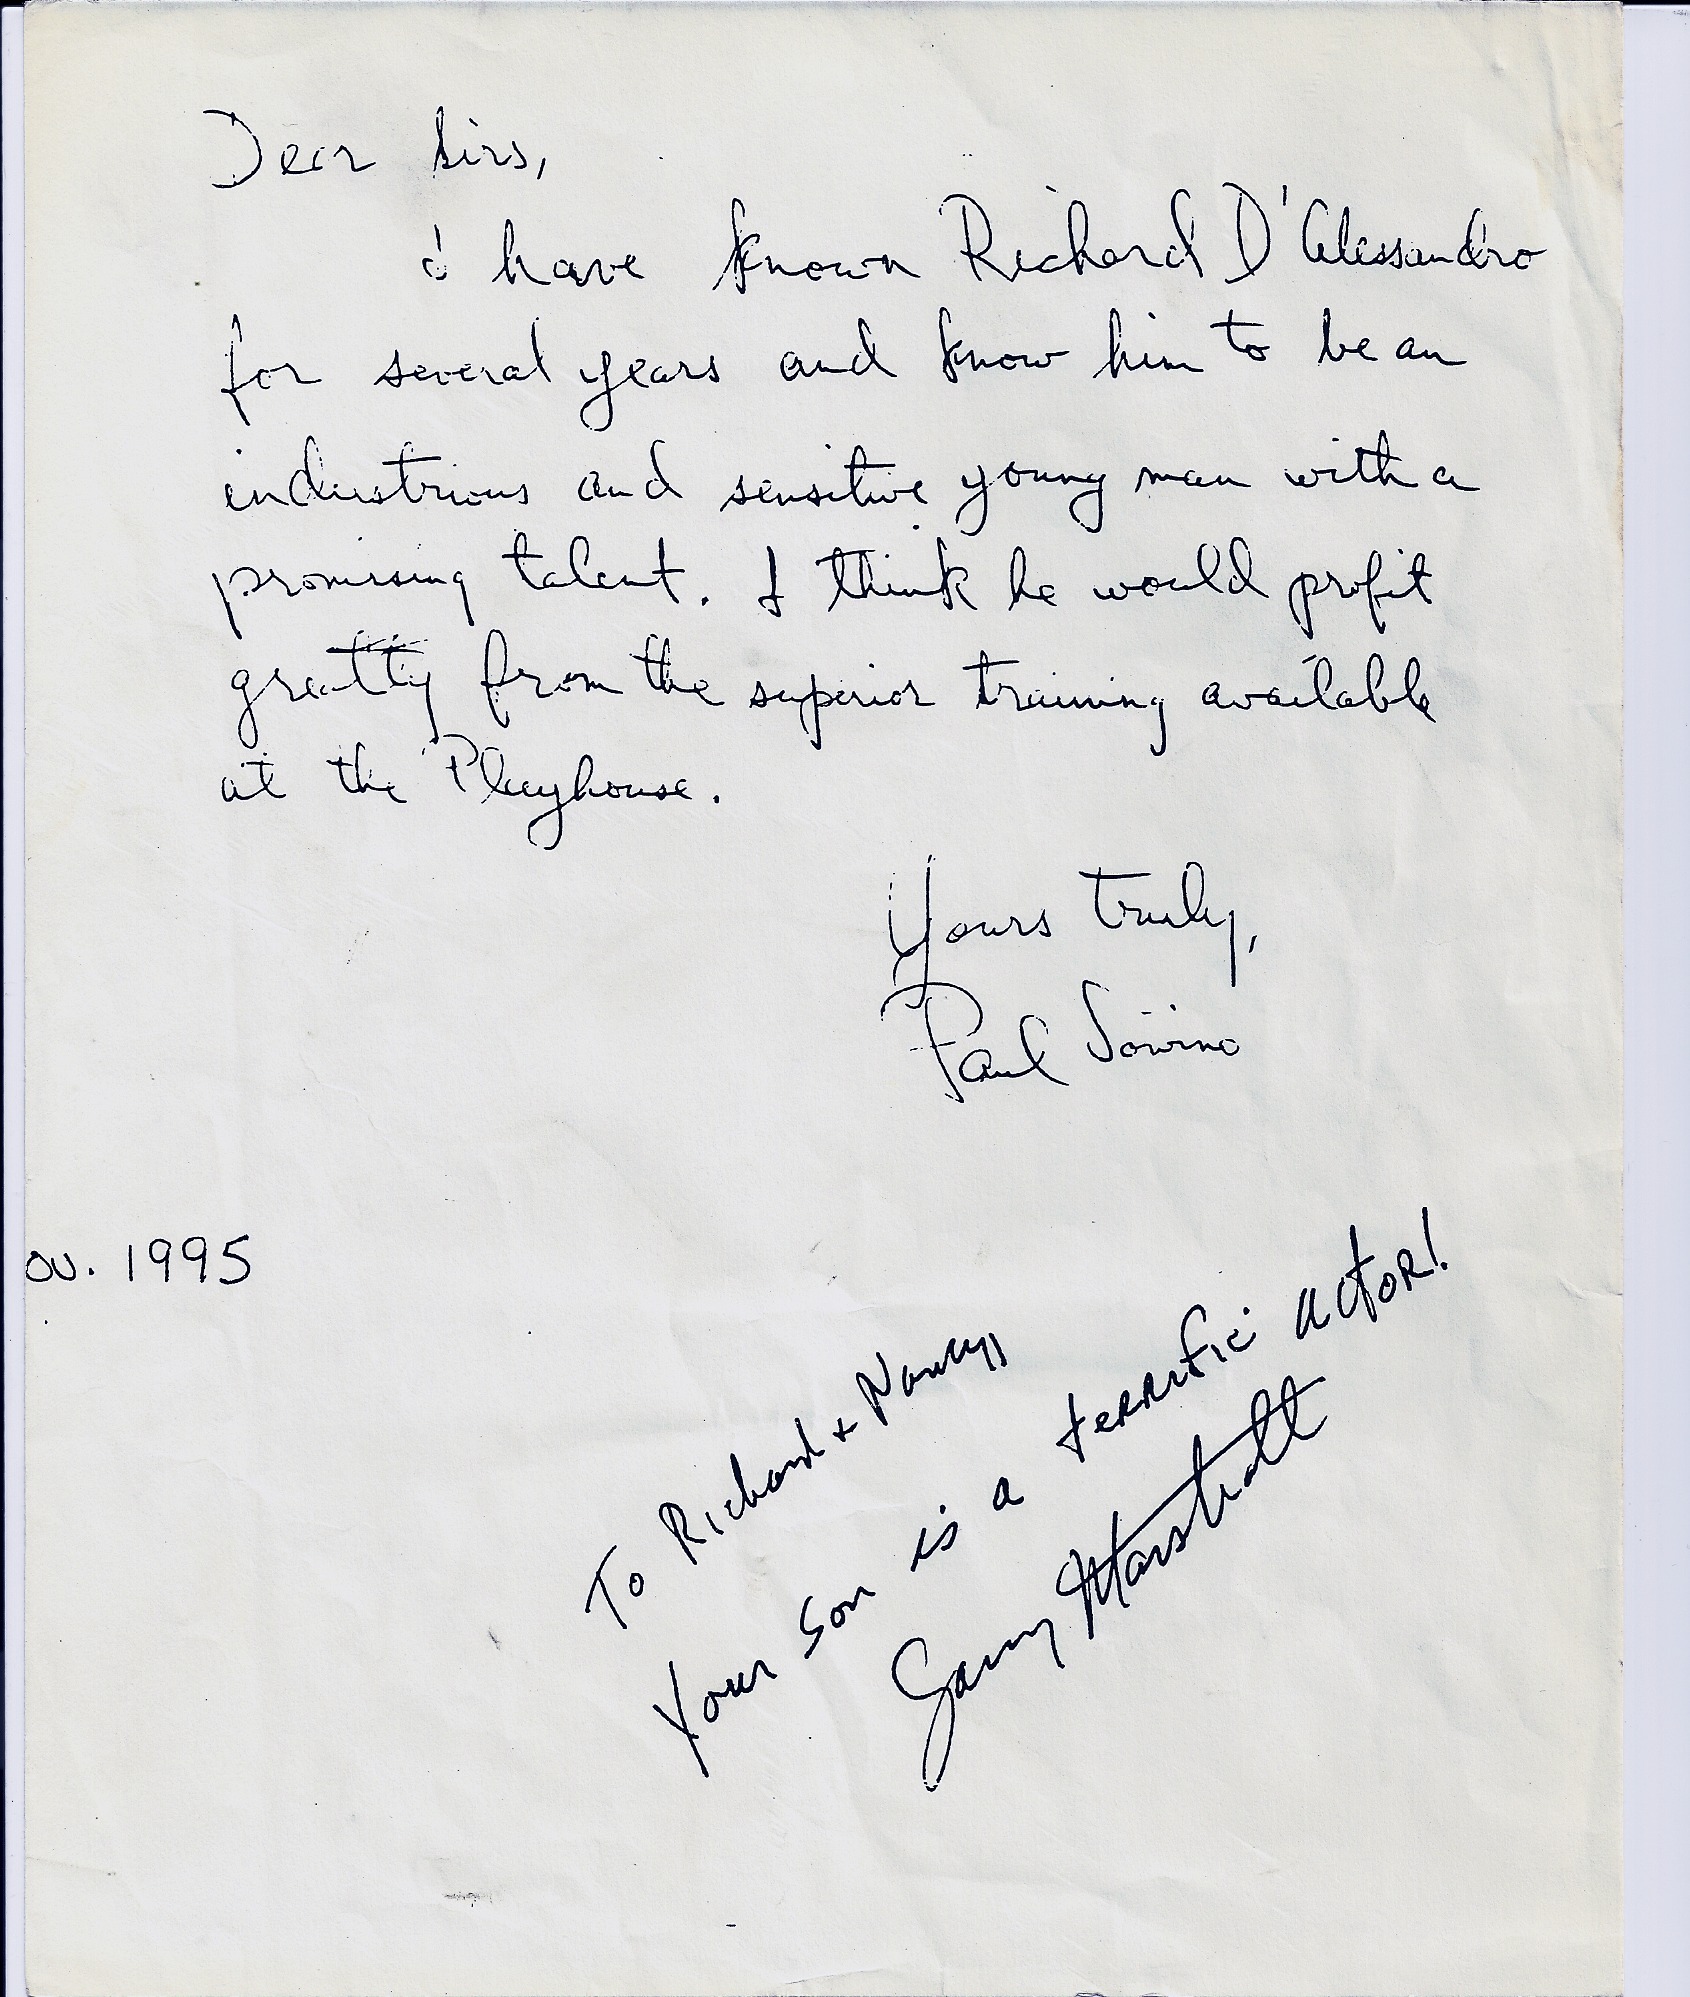 This letter started actor Richard D'Alessandro's acting career , written to Sanford Misner by his Friend Paul Sorvino, to help Richard get into the Neighborhood Playhouse (top) (bottom) Garry Marshall started Richards film career with 